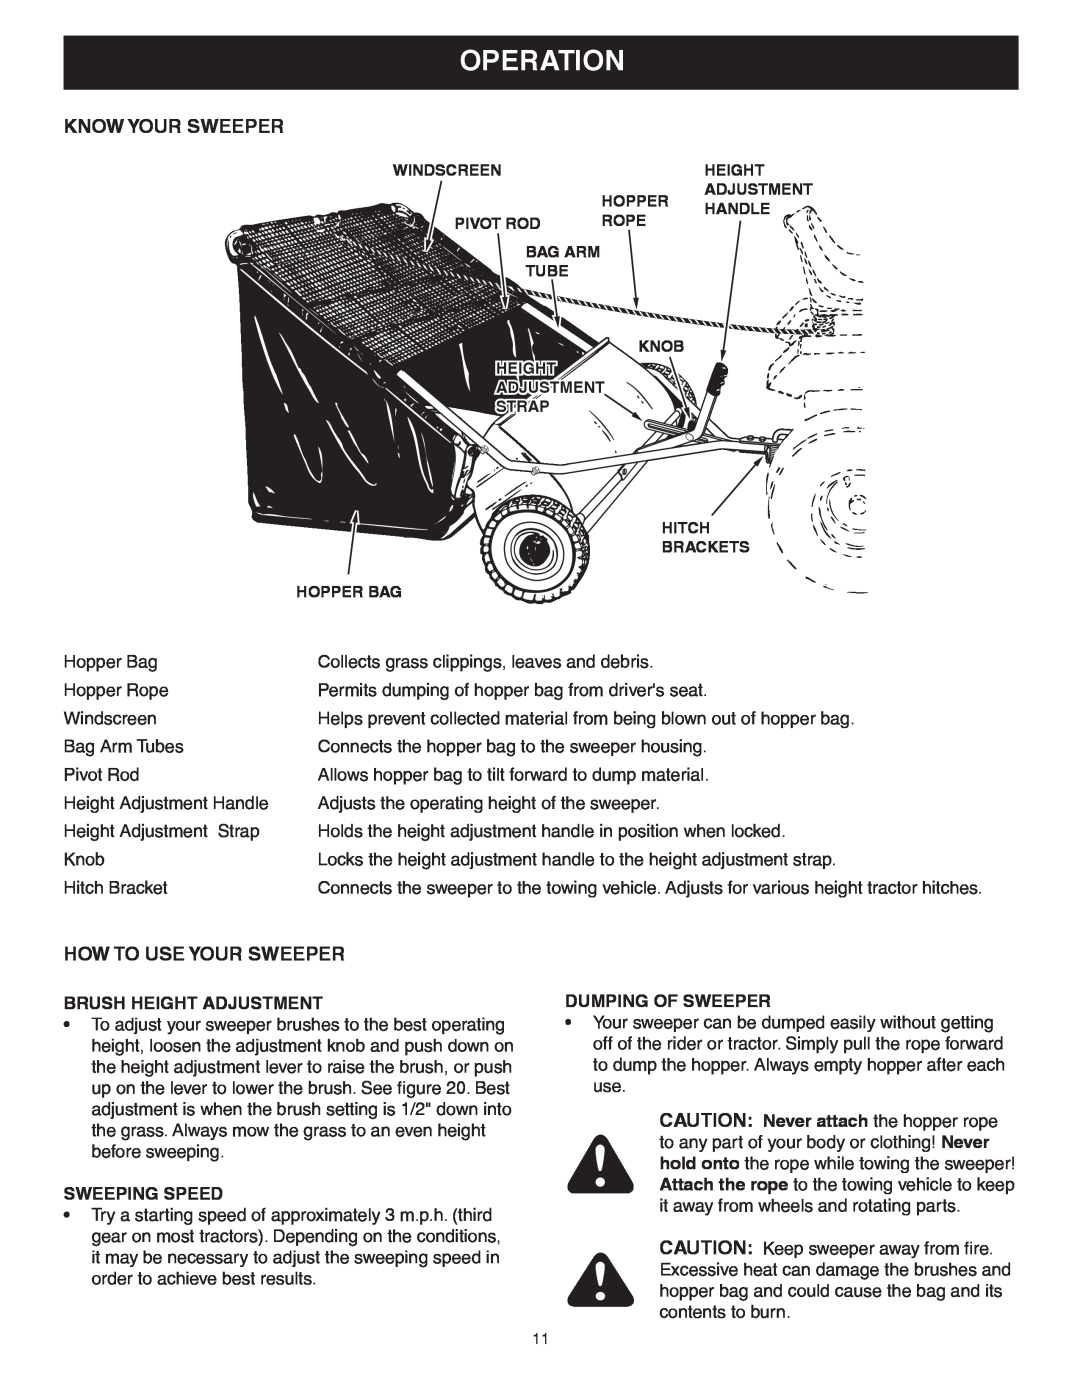 Craftsman 486.24222 owner manual Operation, Know Your Sweeper, How To Use Your Sweeper 